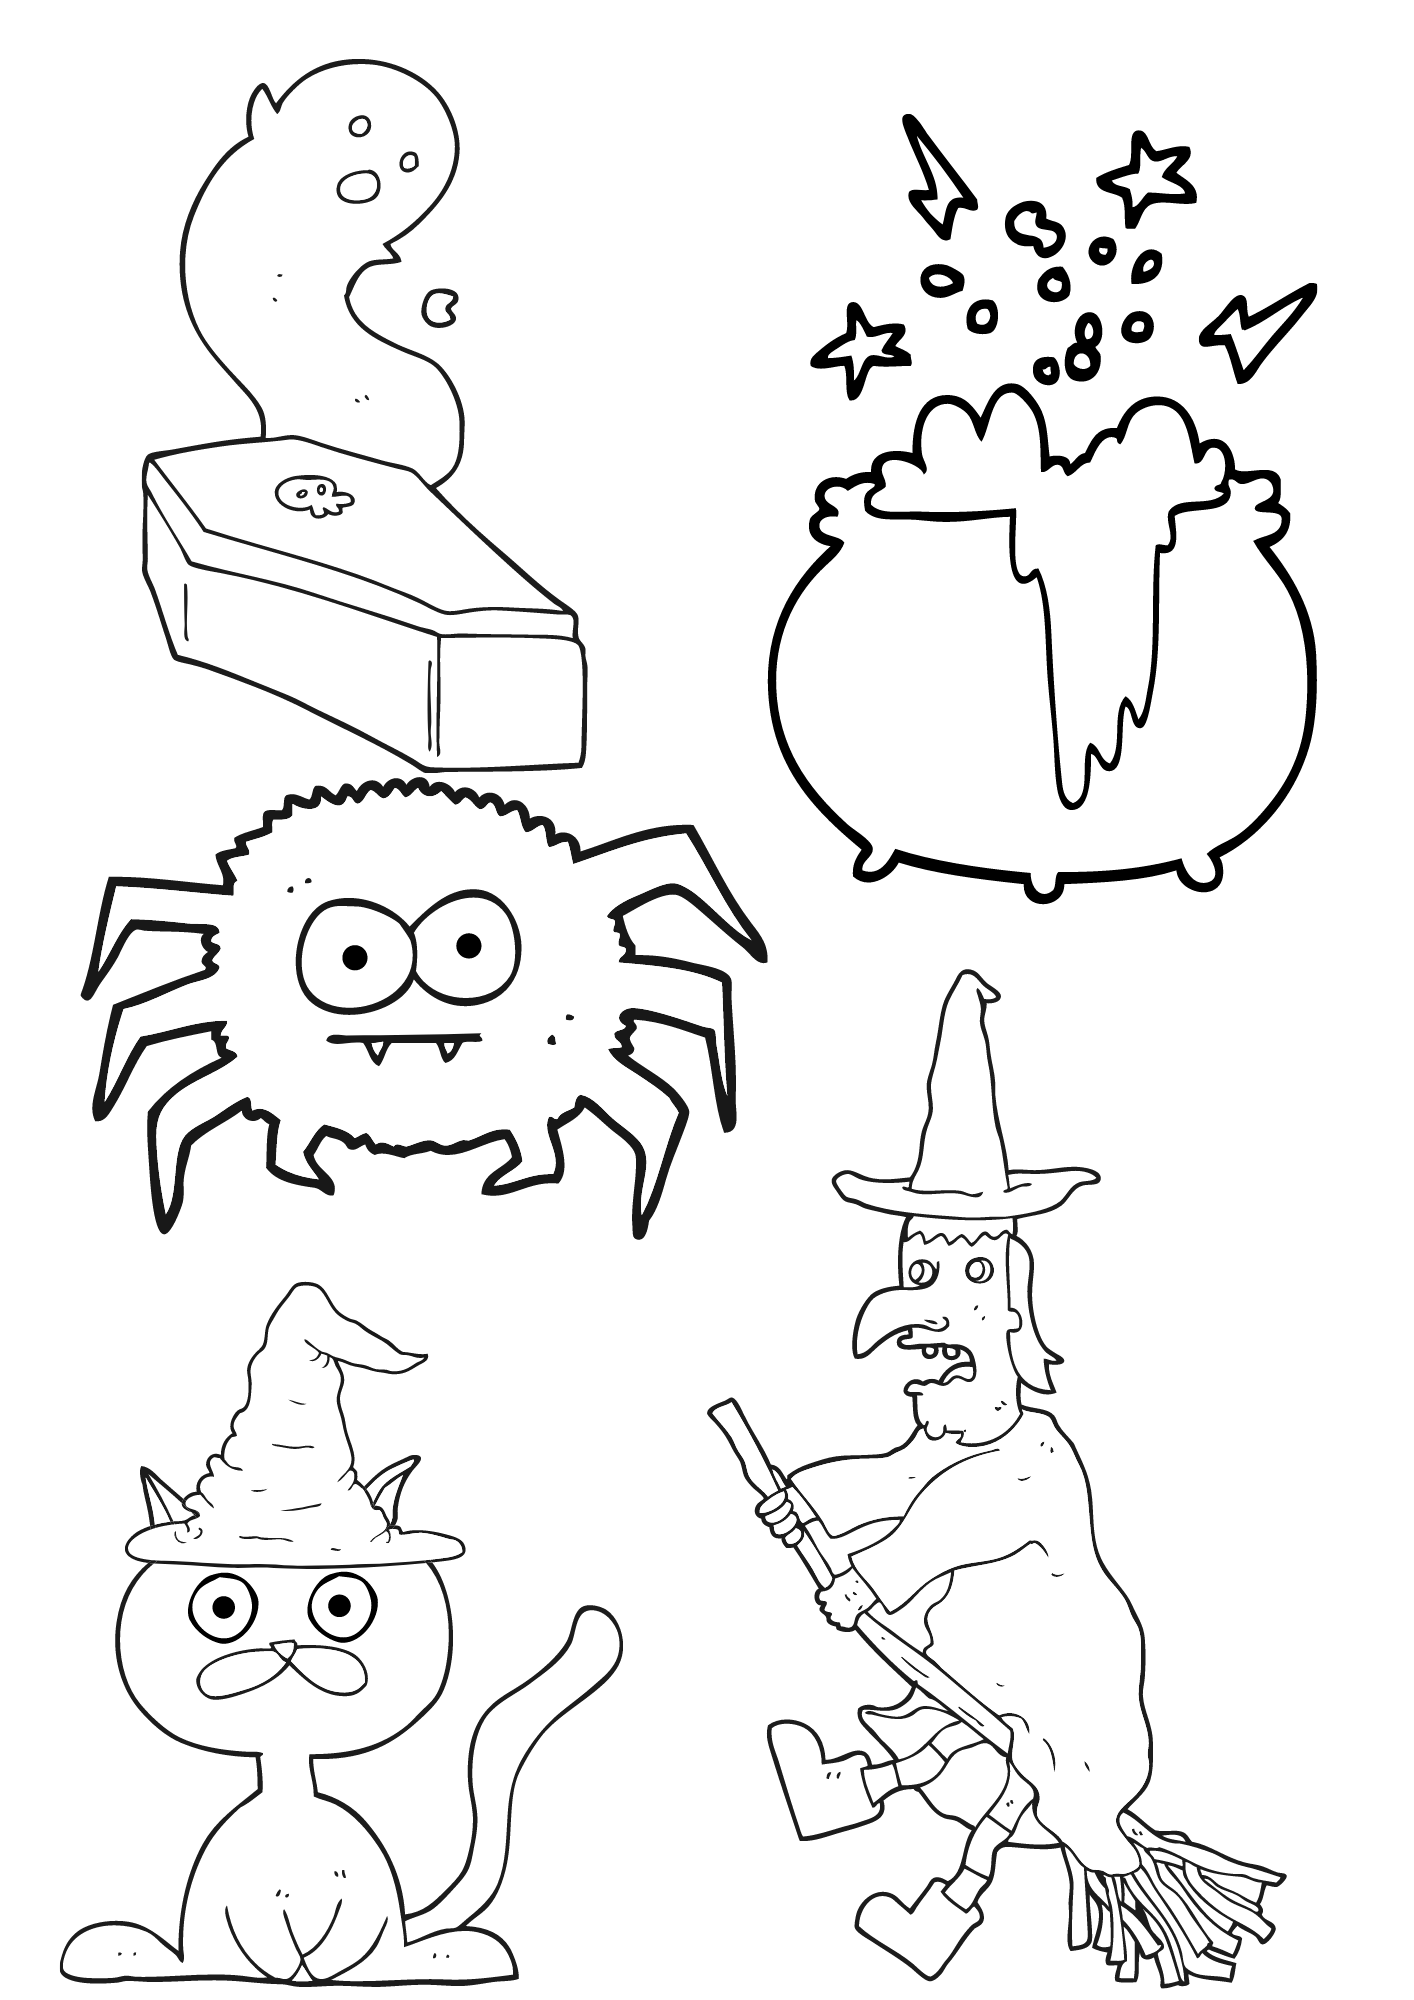 Children's Halloween Colouring sheet | Lipgloss And Curves